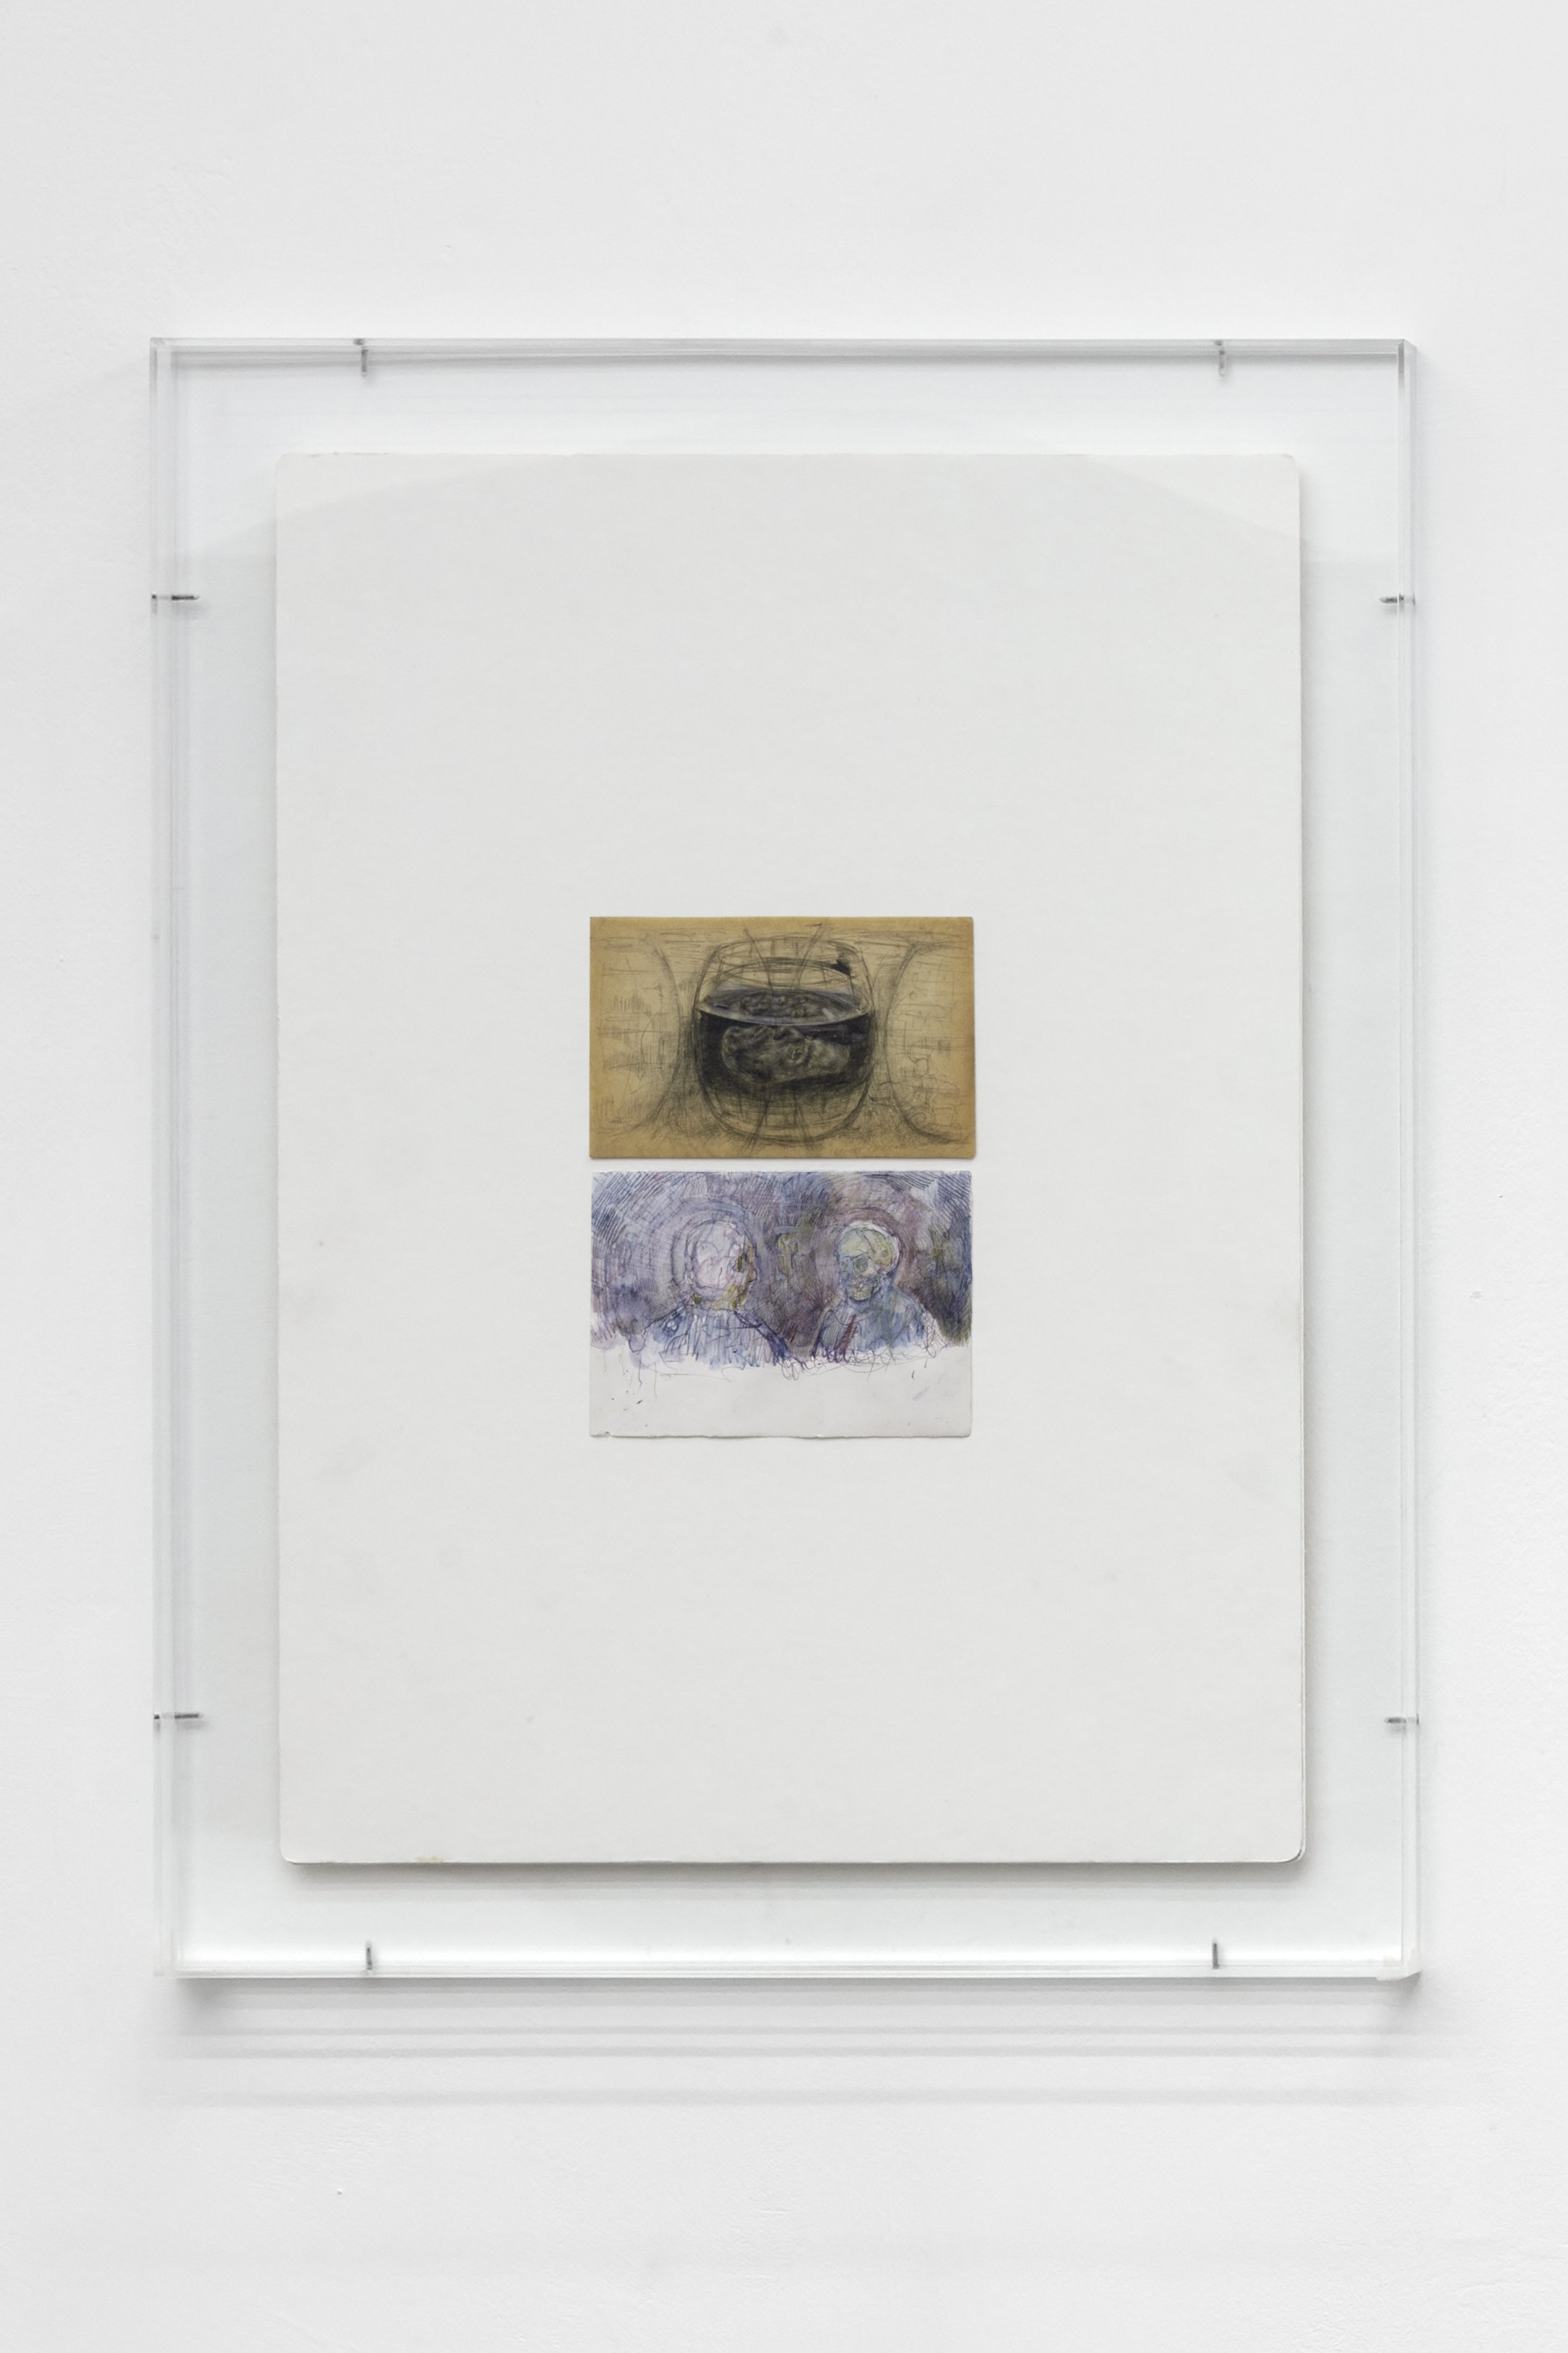  Gavin Bell,  Rooms in shapes of shadow,  2023, Pencil, graphite, watercolour, oil, paper, found and modified mount board, acrylic frame, screws, 646mm x 496mm x 34mm 